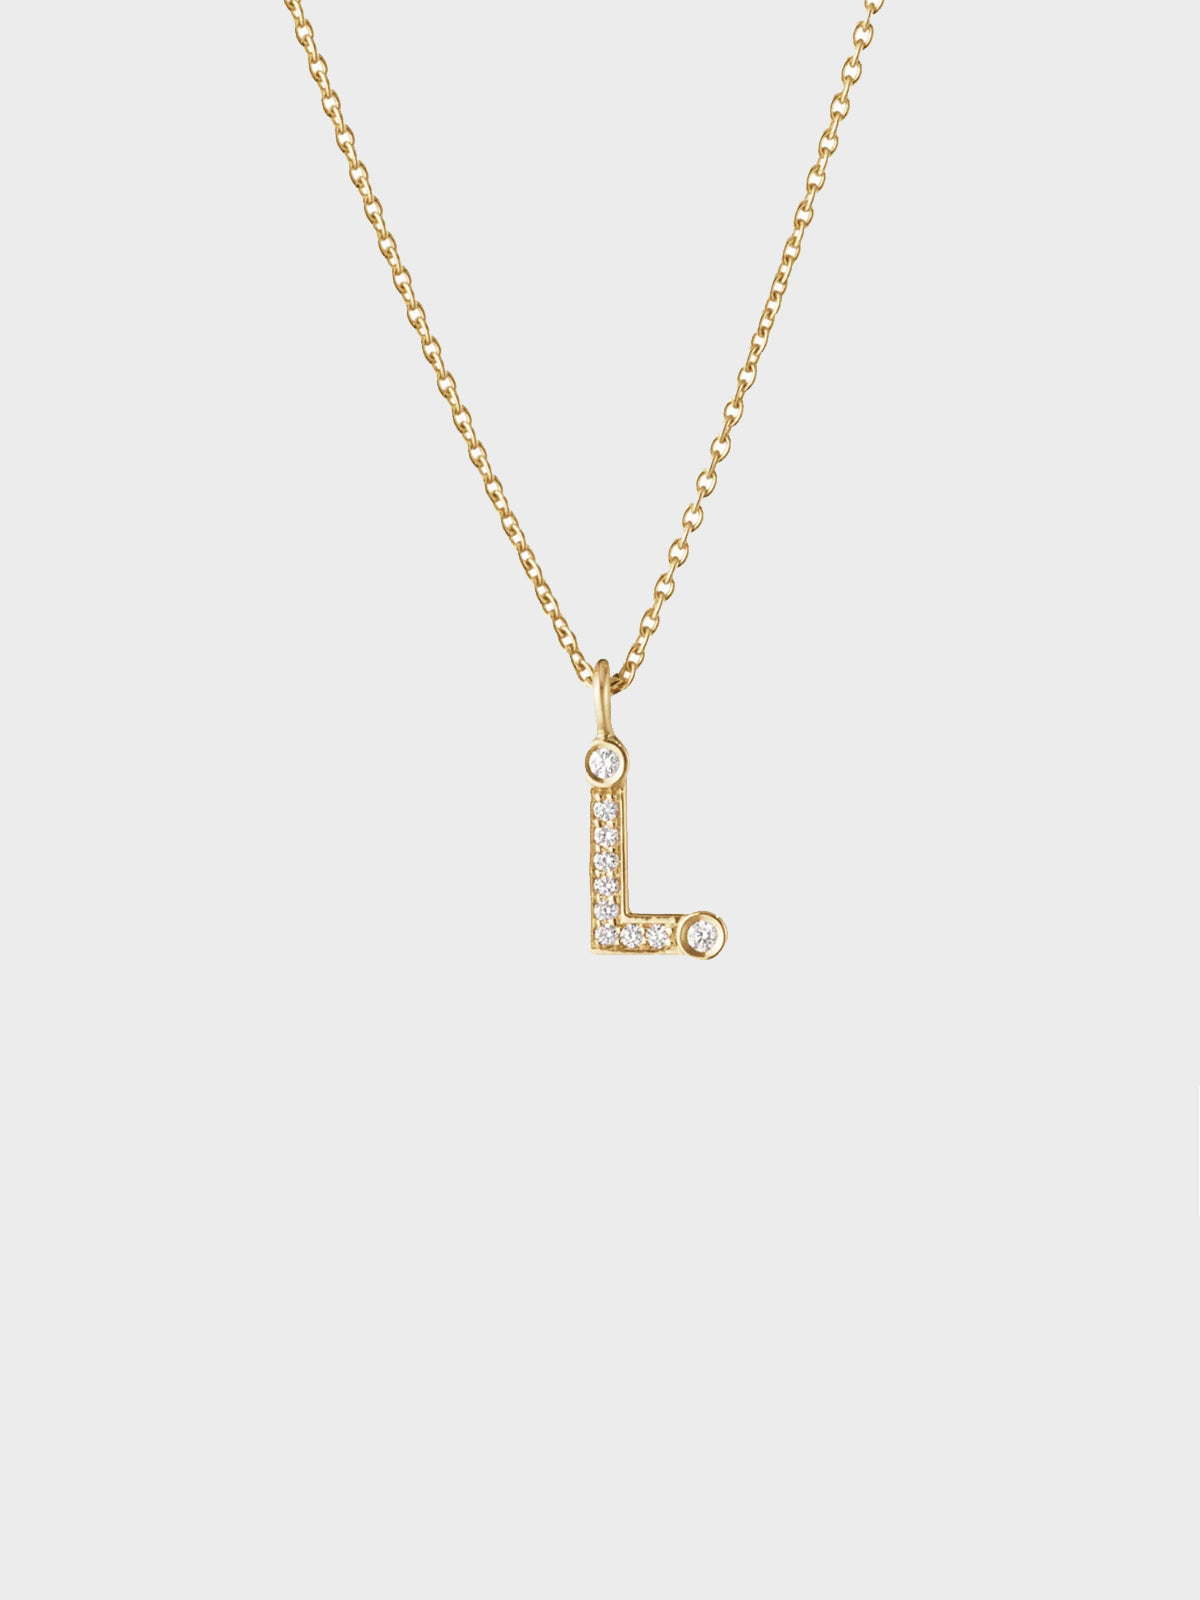 Sophie Bille Brahe - Simple L Necklace in 18K Yellow Gold